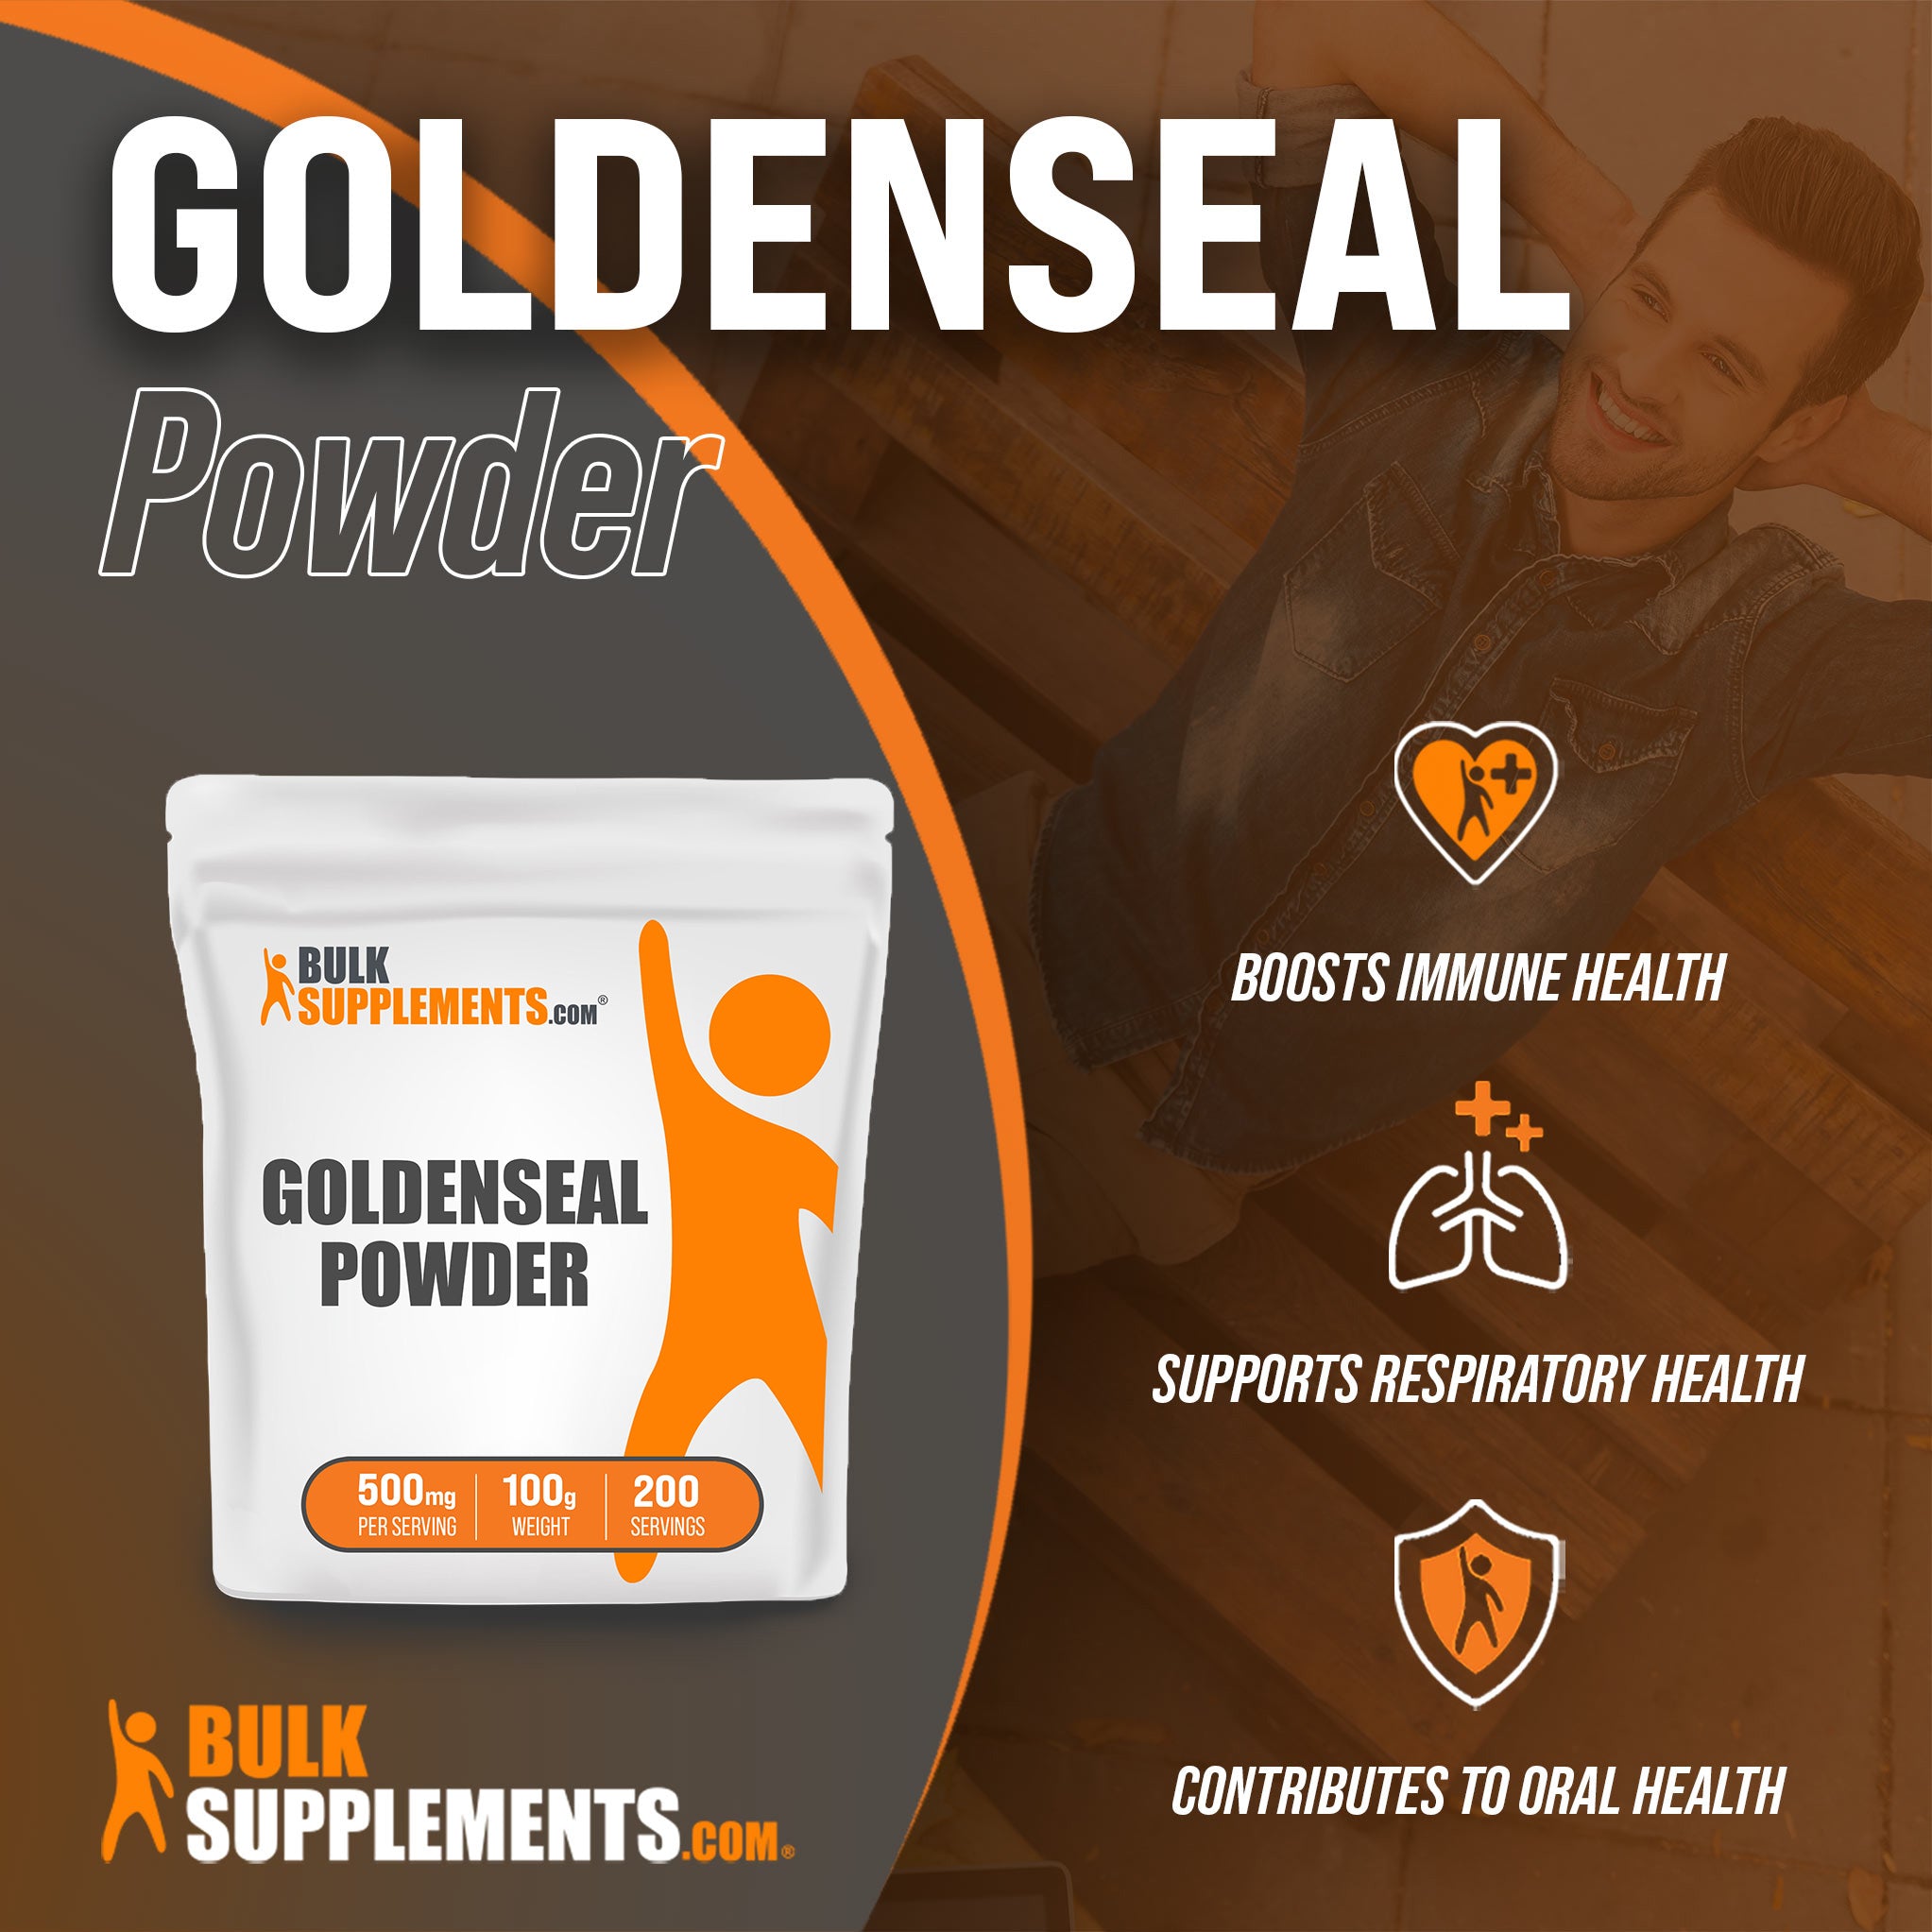 Benefits of Goldenseal Powder; boosts immune health, supports respiratory health, contributes to oral health